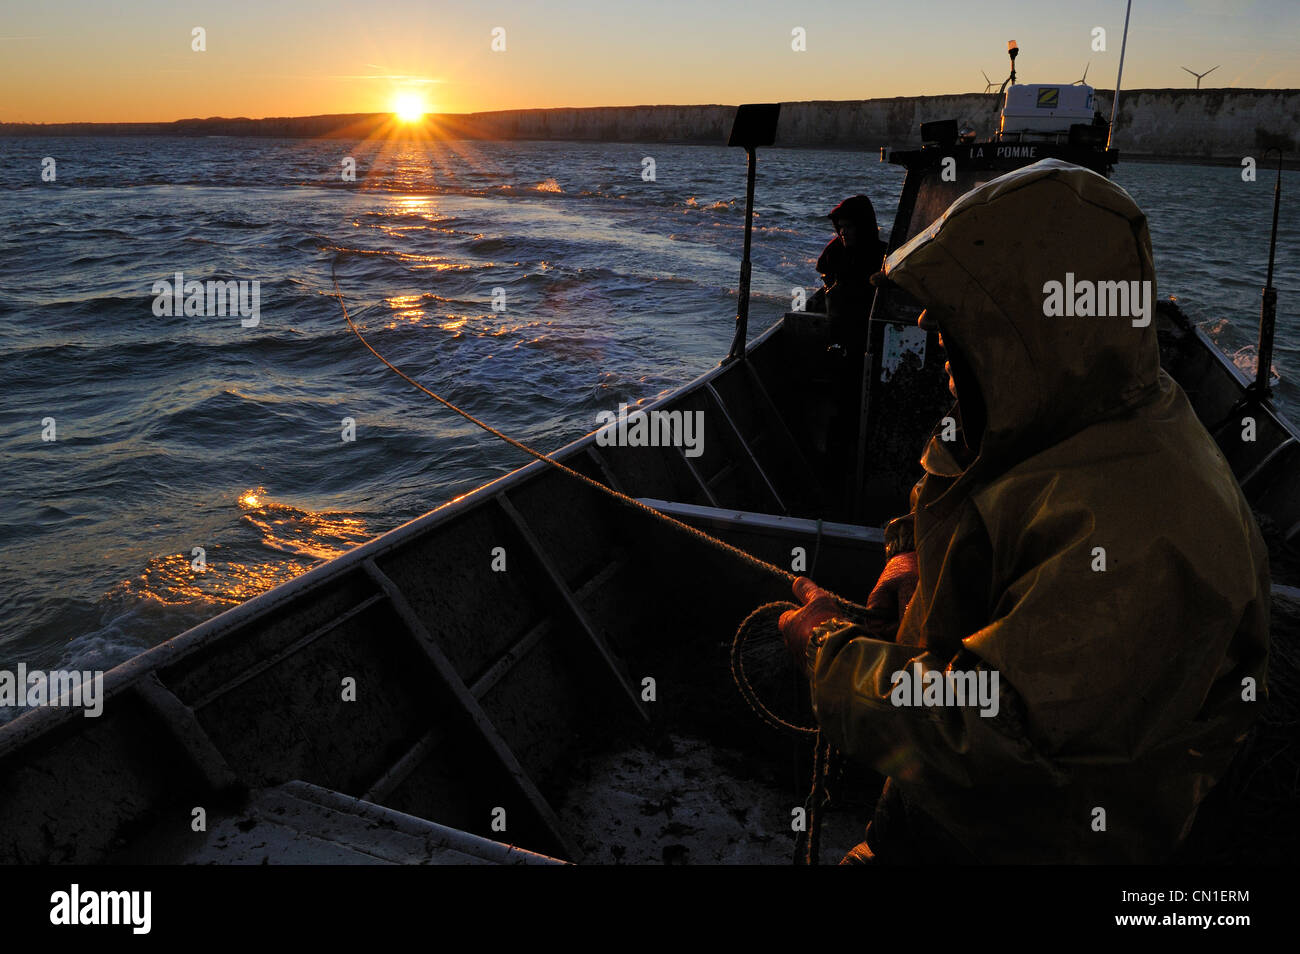 France, Seine Maritime, off the coast of Veules les Roses at dawn, net fishing on the boat La Pomme owned by Anthony Paumier Stock Photo